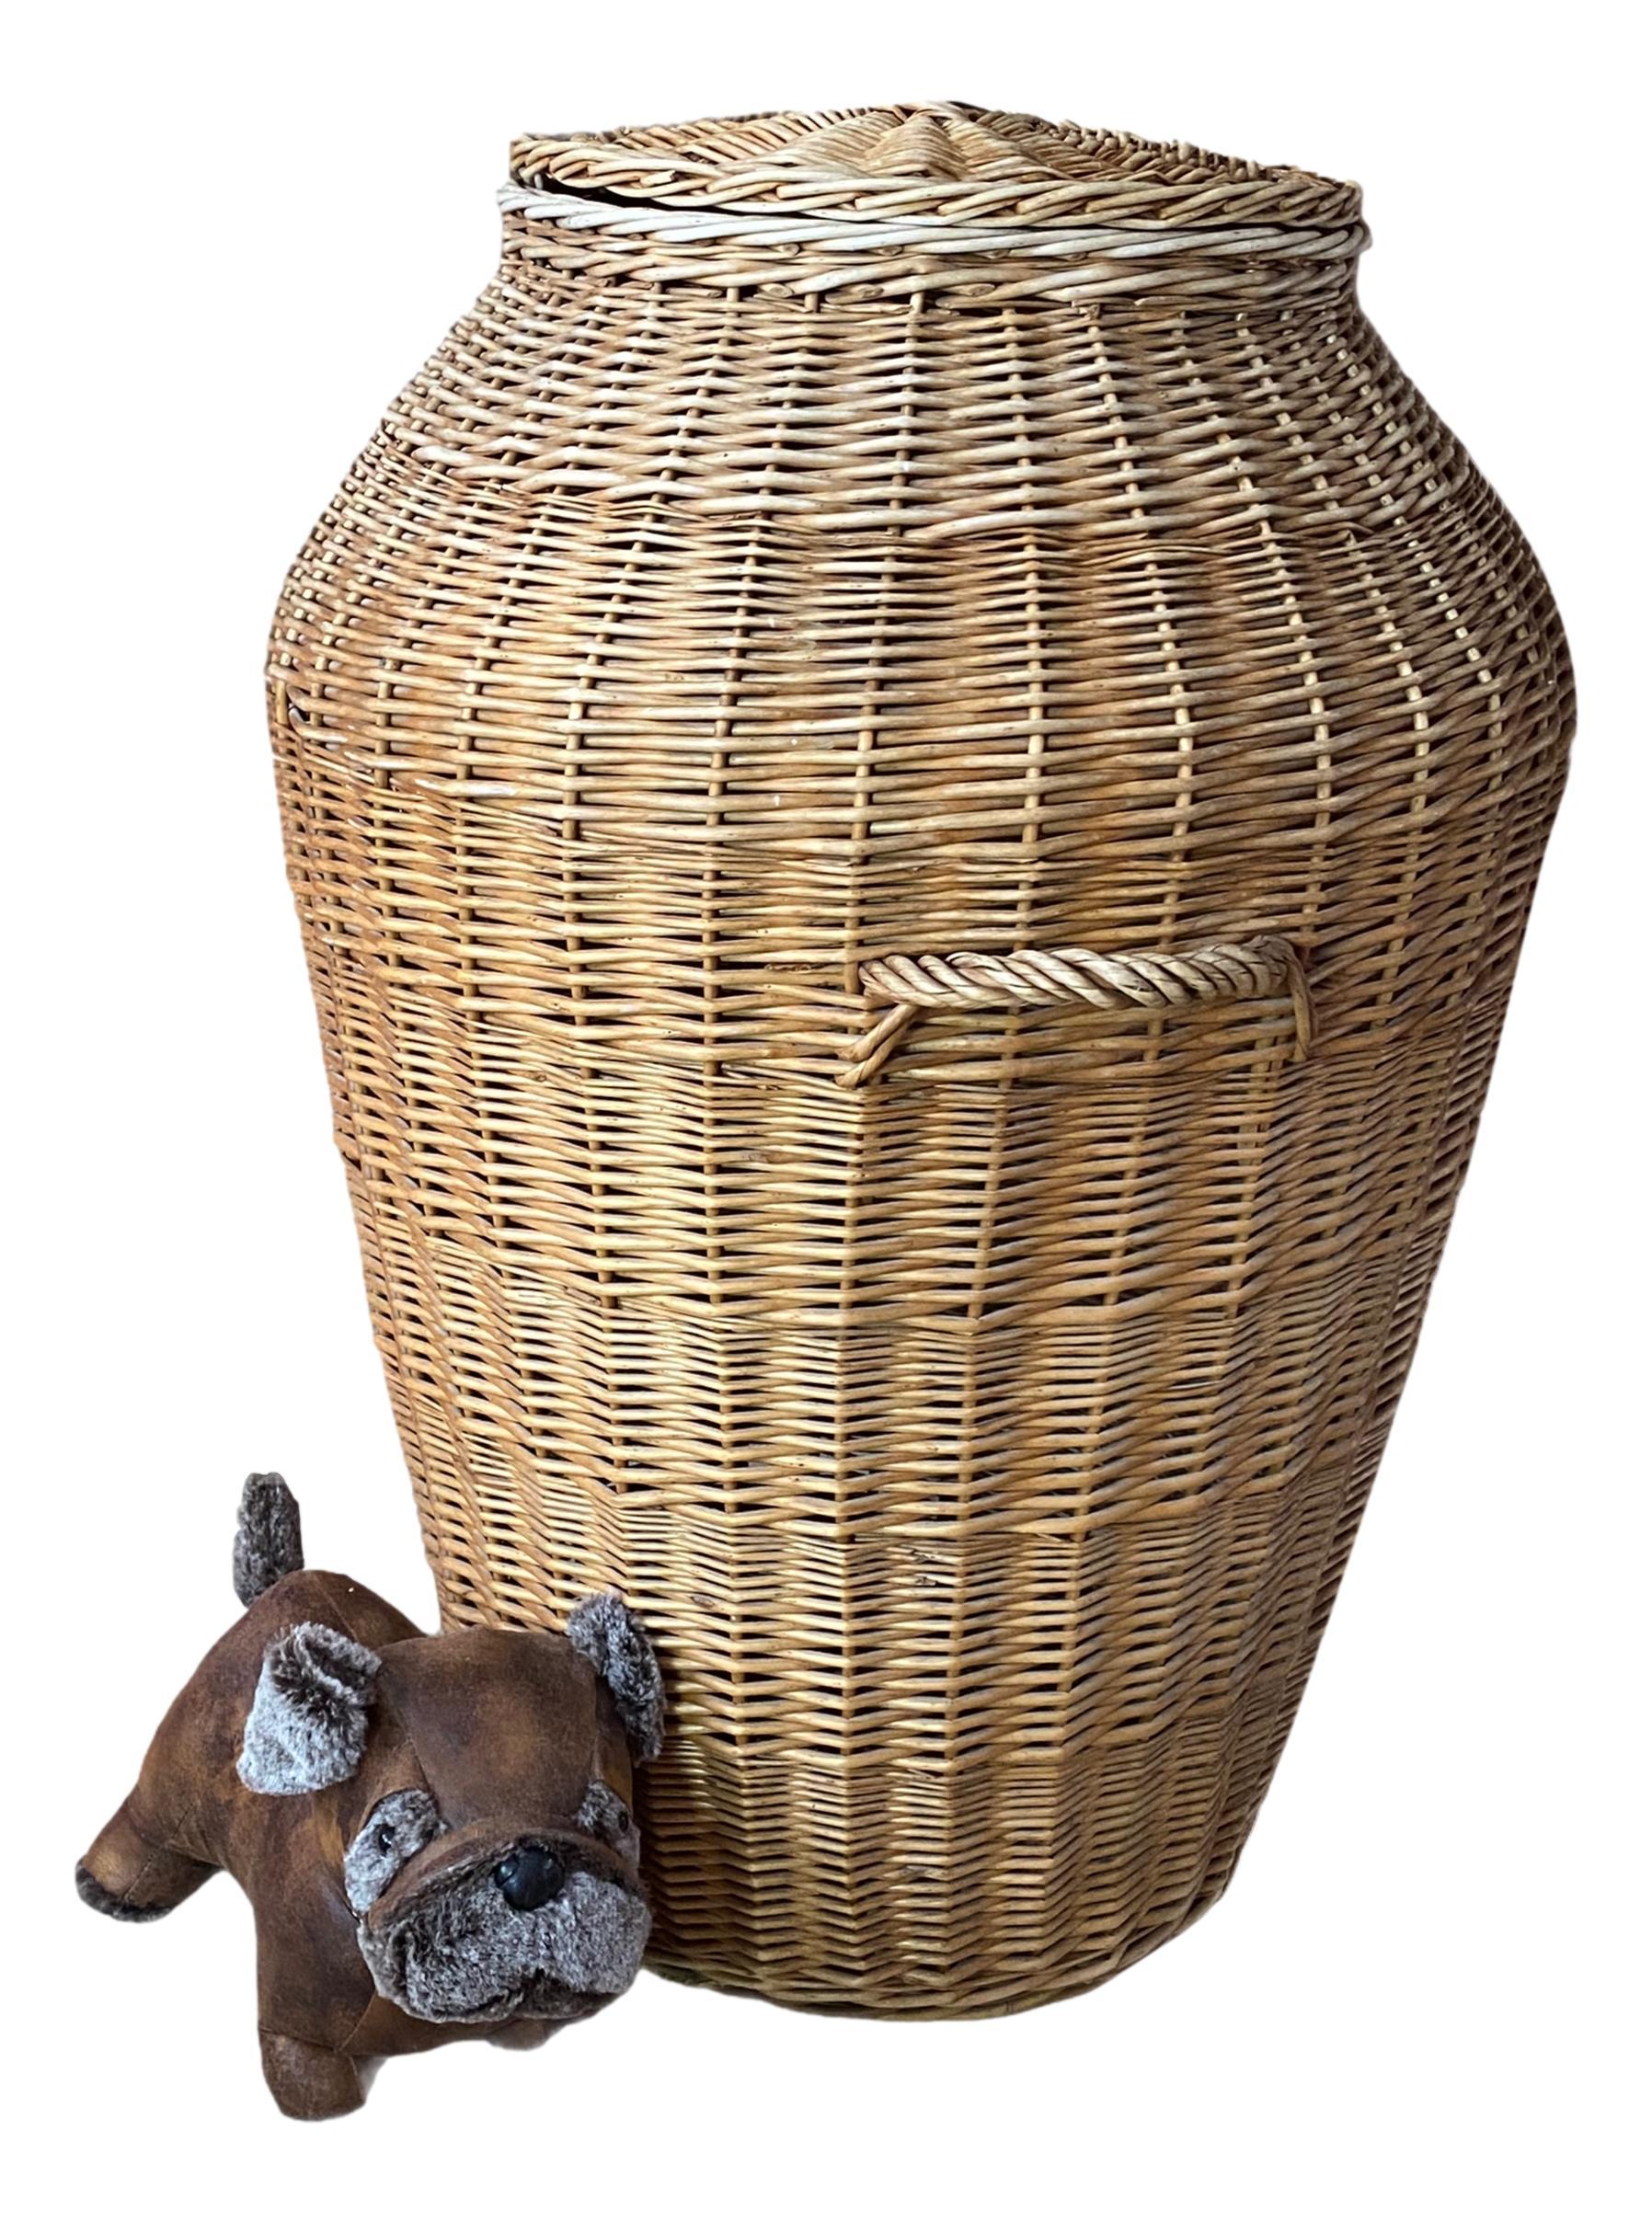 Offered is an absolutely stunning large 1970s vintage wicker laundry basket hamper with lid and wicker handles. Overall very good vintage condition with light ware consistent with age and use.